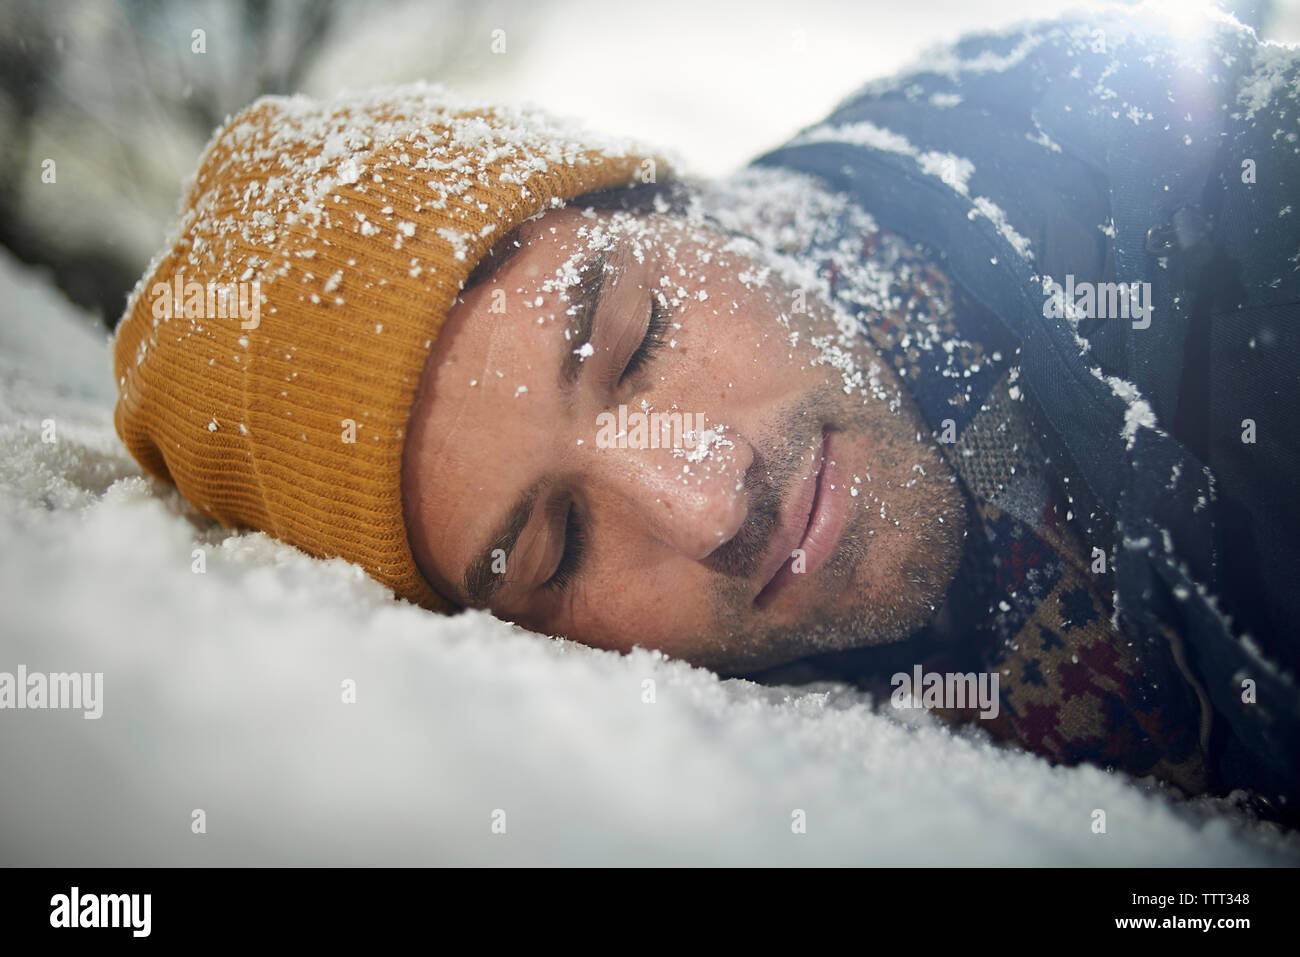 Close-up of man napping on snow covered car bonnet during snowfall Stock Photo